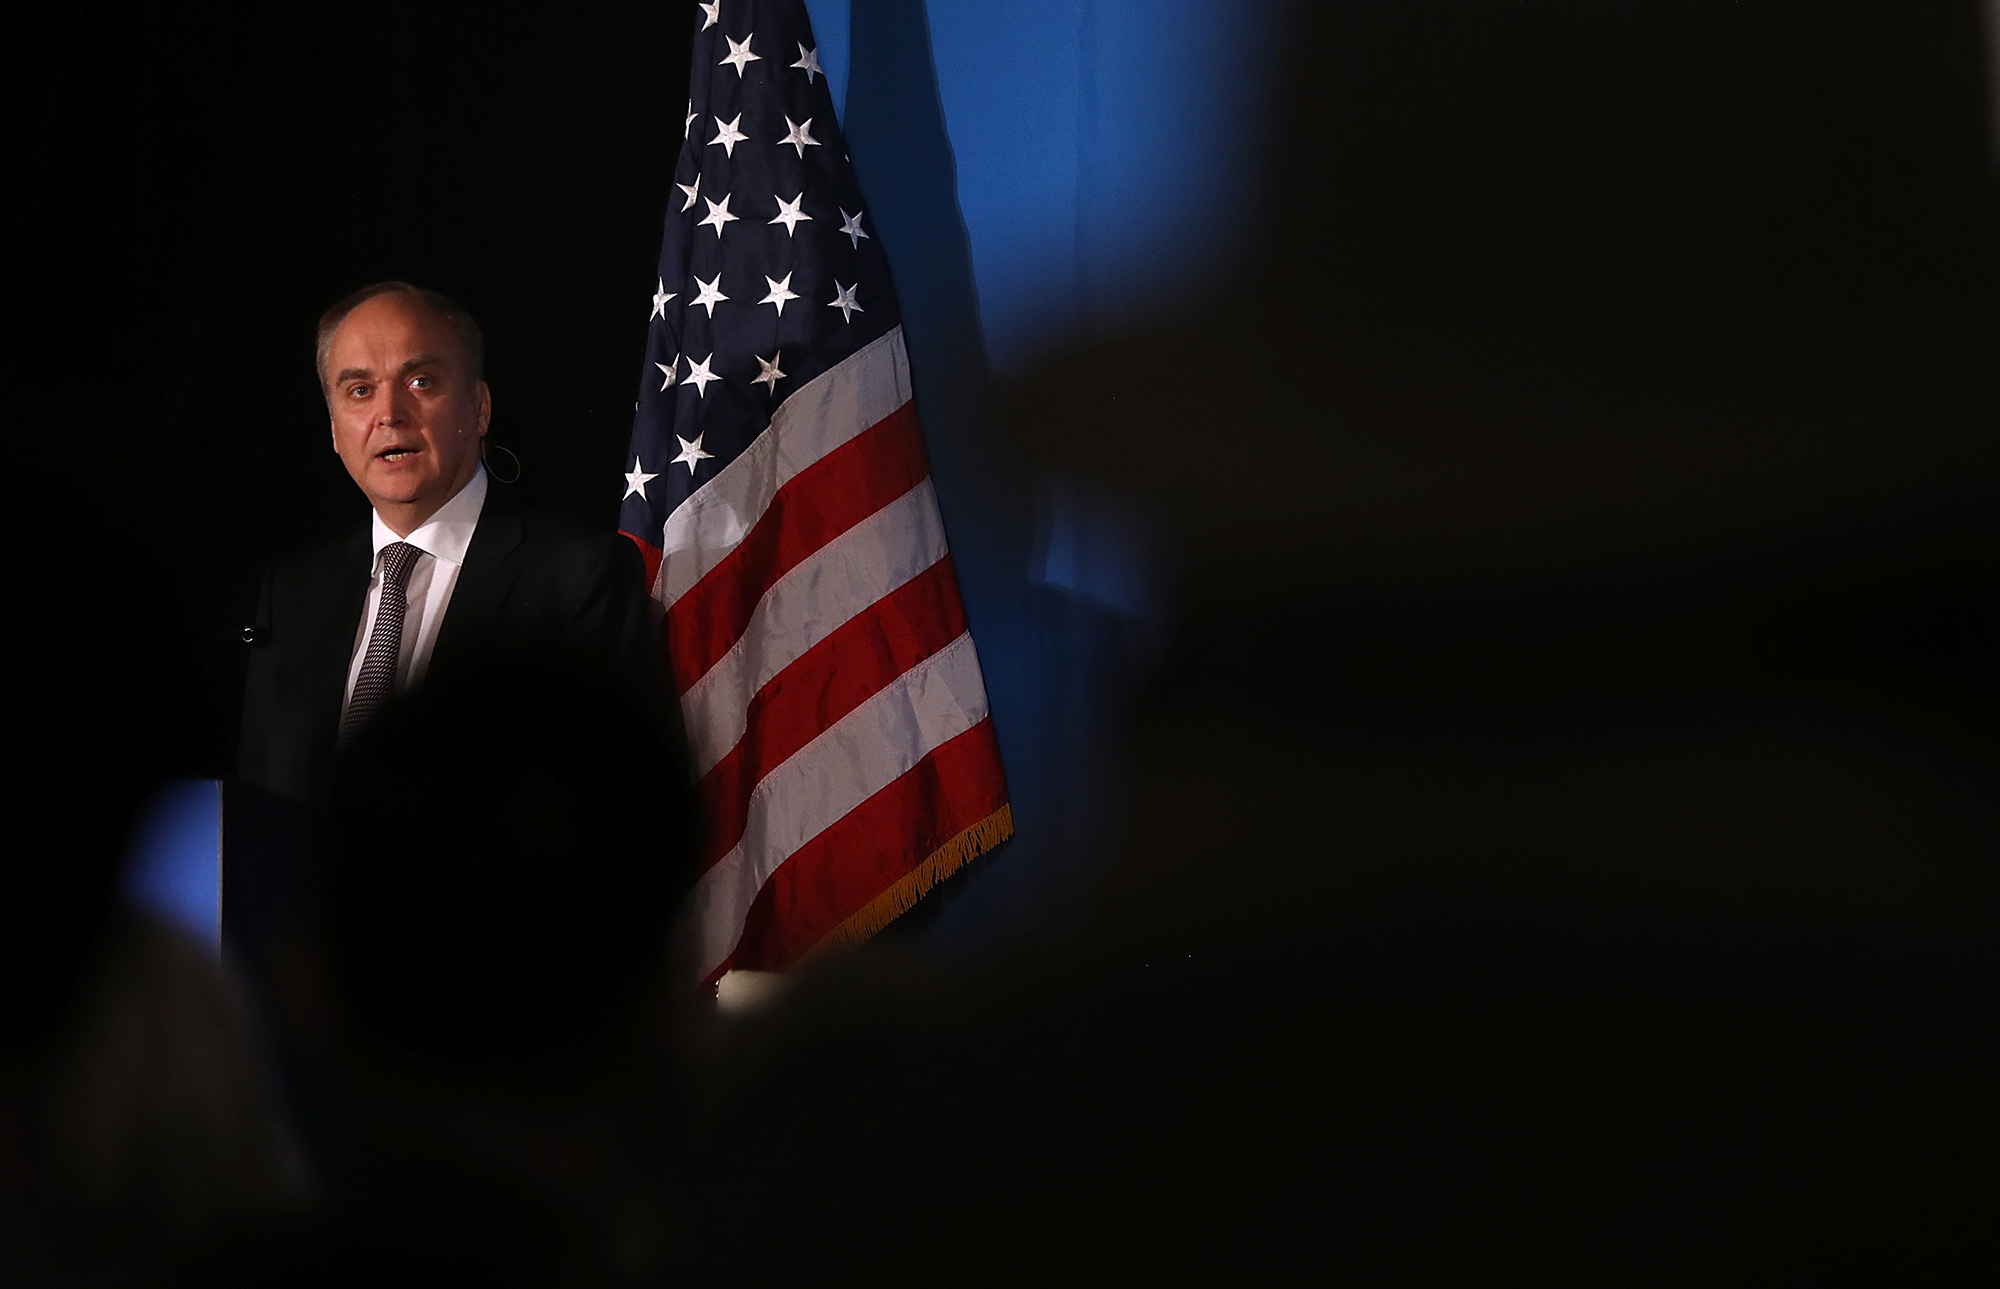 In this 2017 photo, Russia Ambassador to the US Anatoly Antonov speaks during a World Affairs event at the Fairmont Hotel in San Francisco, California.